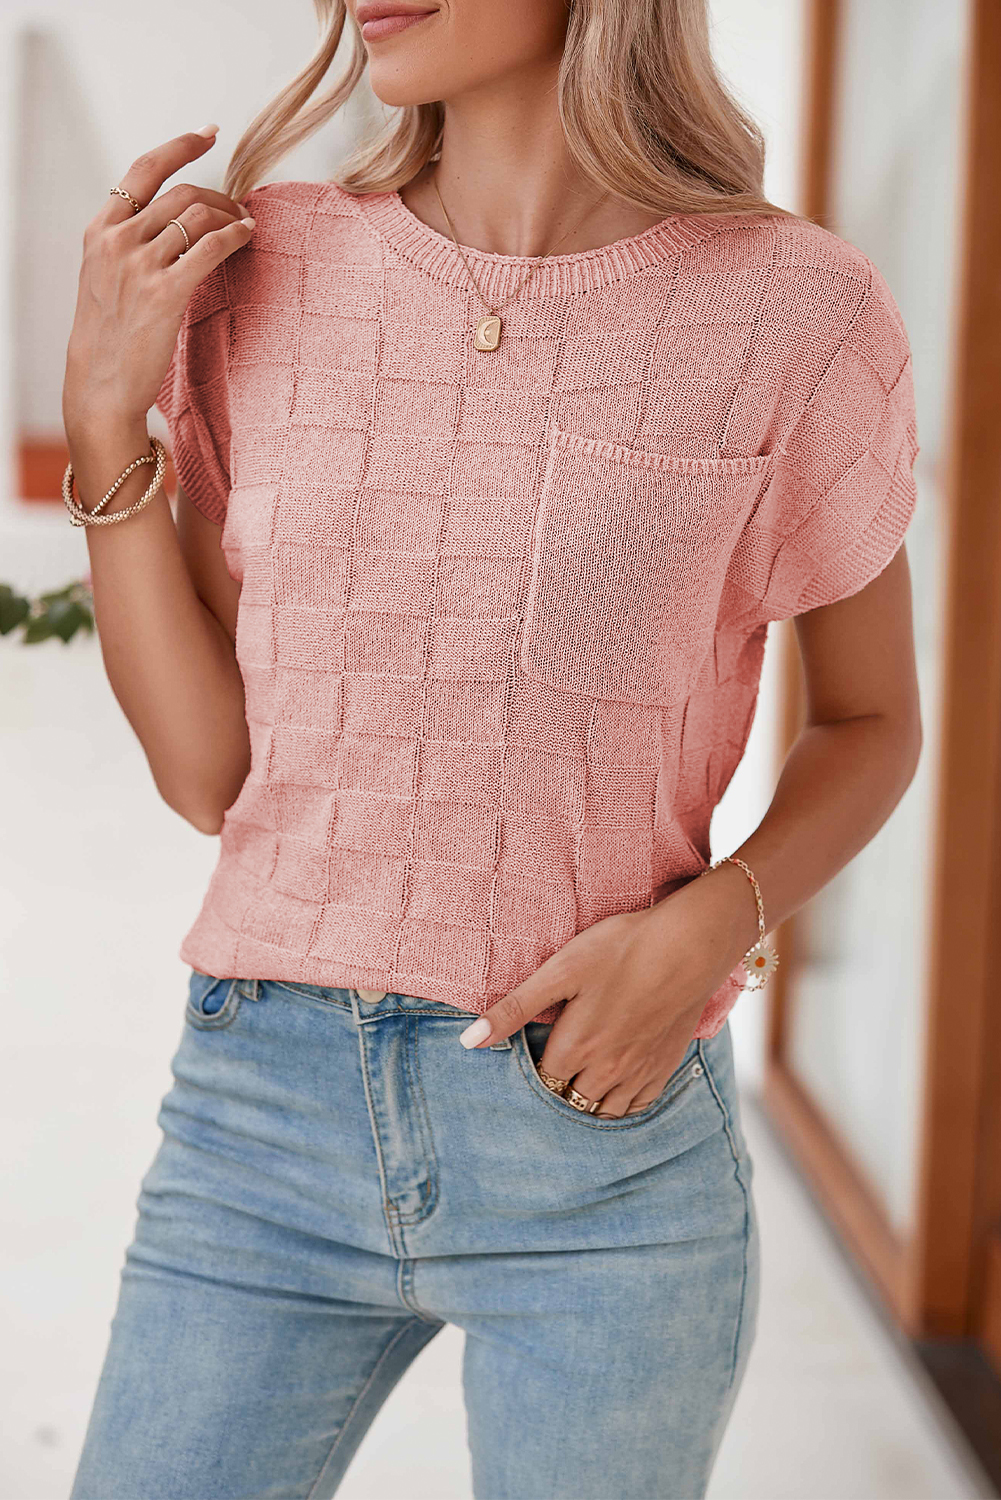 Shewin Wholesale Spring Wholesale Dusty Pink Lattice Textured Knit Short Sleeve Baggy SWEATER